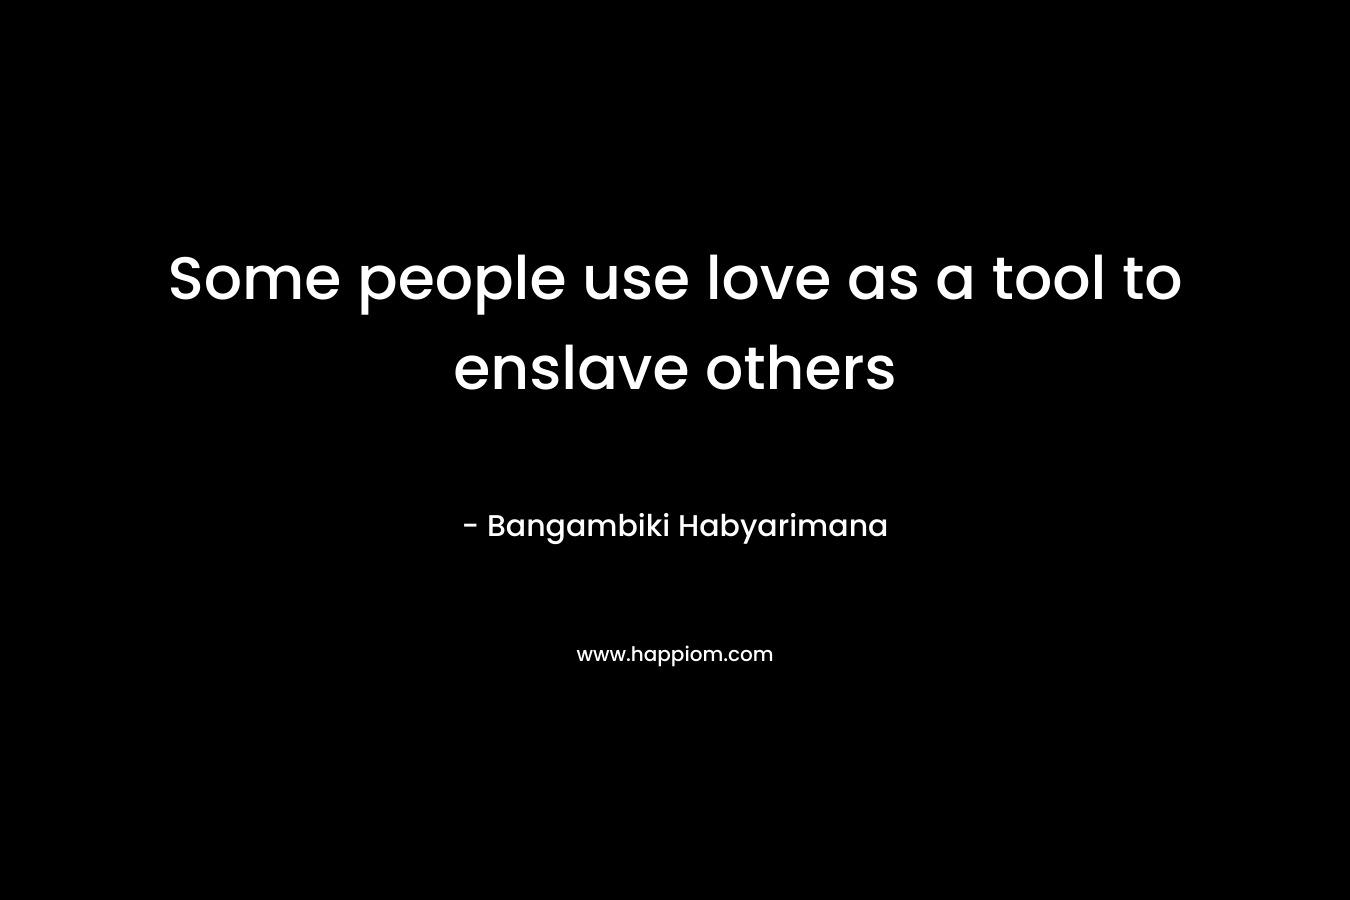 Some people use love as a tool to enslave others